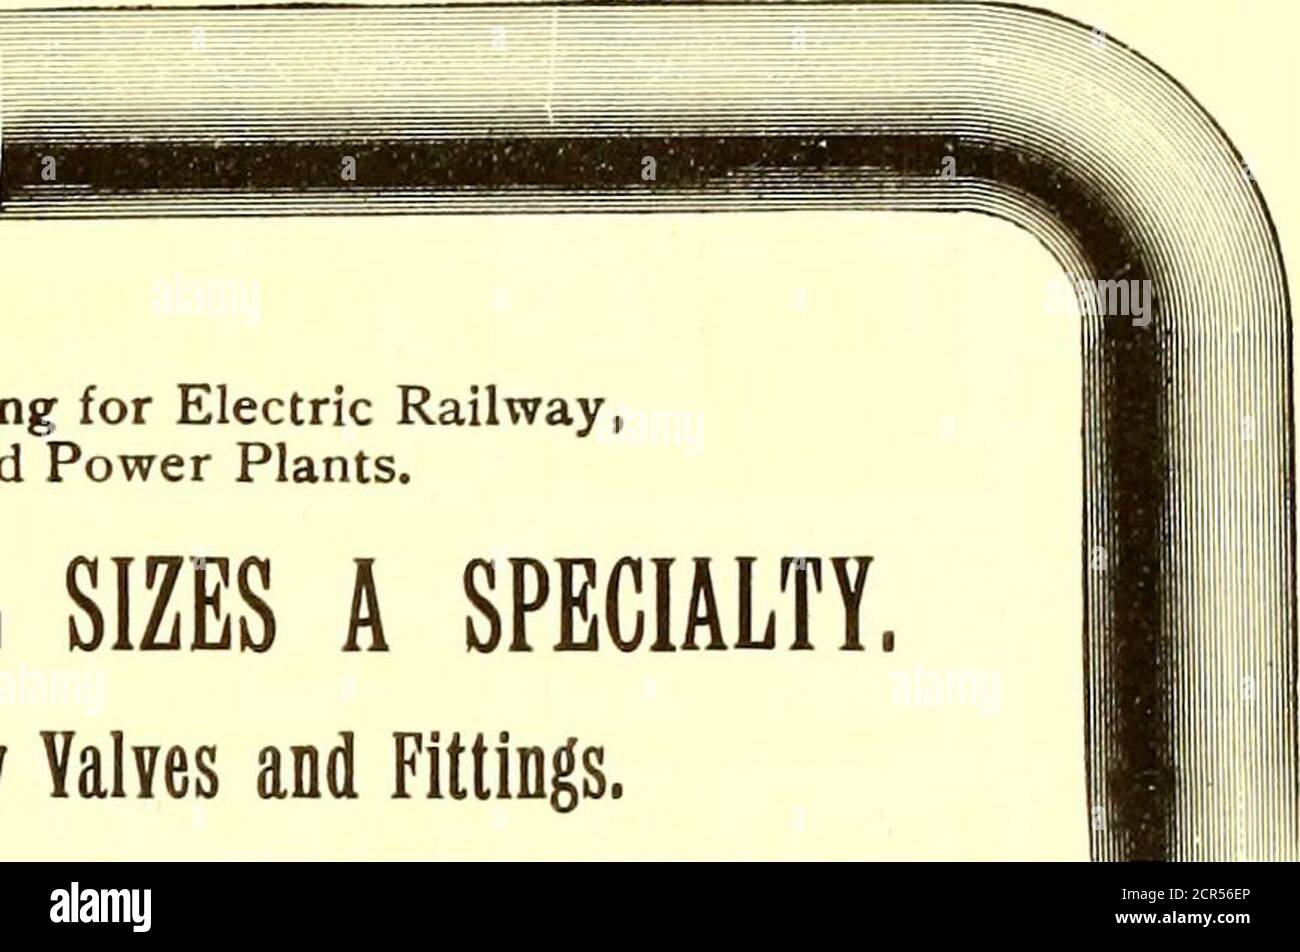 . The Street railway journal . High Pressure Pipe Fitting for Electric Railway,Electric Light and Power Plants. PIPE BENDING OF ALL SIZES A SPECIALTY. Manufacturers of Heavy Yalves and Fittings. AGENTS FOR STEAM PUMPS.. ESTIMATES FURNISHED. Economic Legislation of all the States. Ti Law pi Incorporated Companies OPERATING UNDER MUNICIPAL FRANCHISES, Such as Street Railway Companies, Illuminating Gas Companies, Fuel Gas Companies,Electric Central Station Companies, Telephone Companies, Water Companies, Etc. PRECEDED BY A SUGGESTIVE DISCUSSION OP THE ECONOMIC PRINCIPLES INVOLVED IN THEOPERATION, Stock Photo